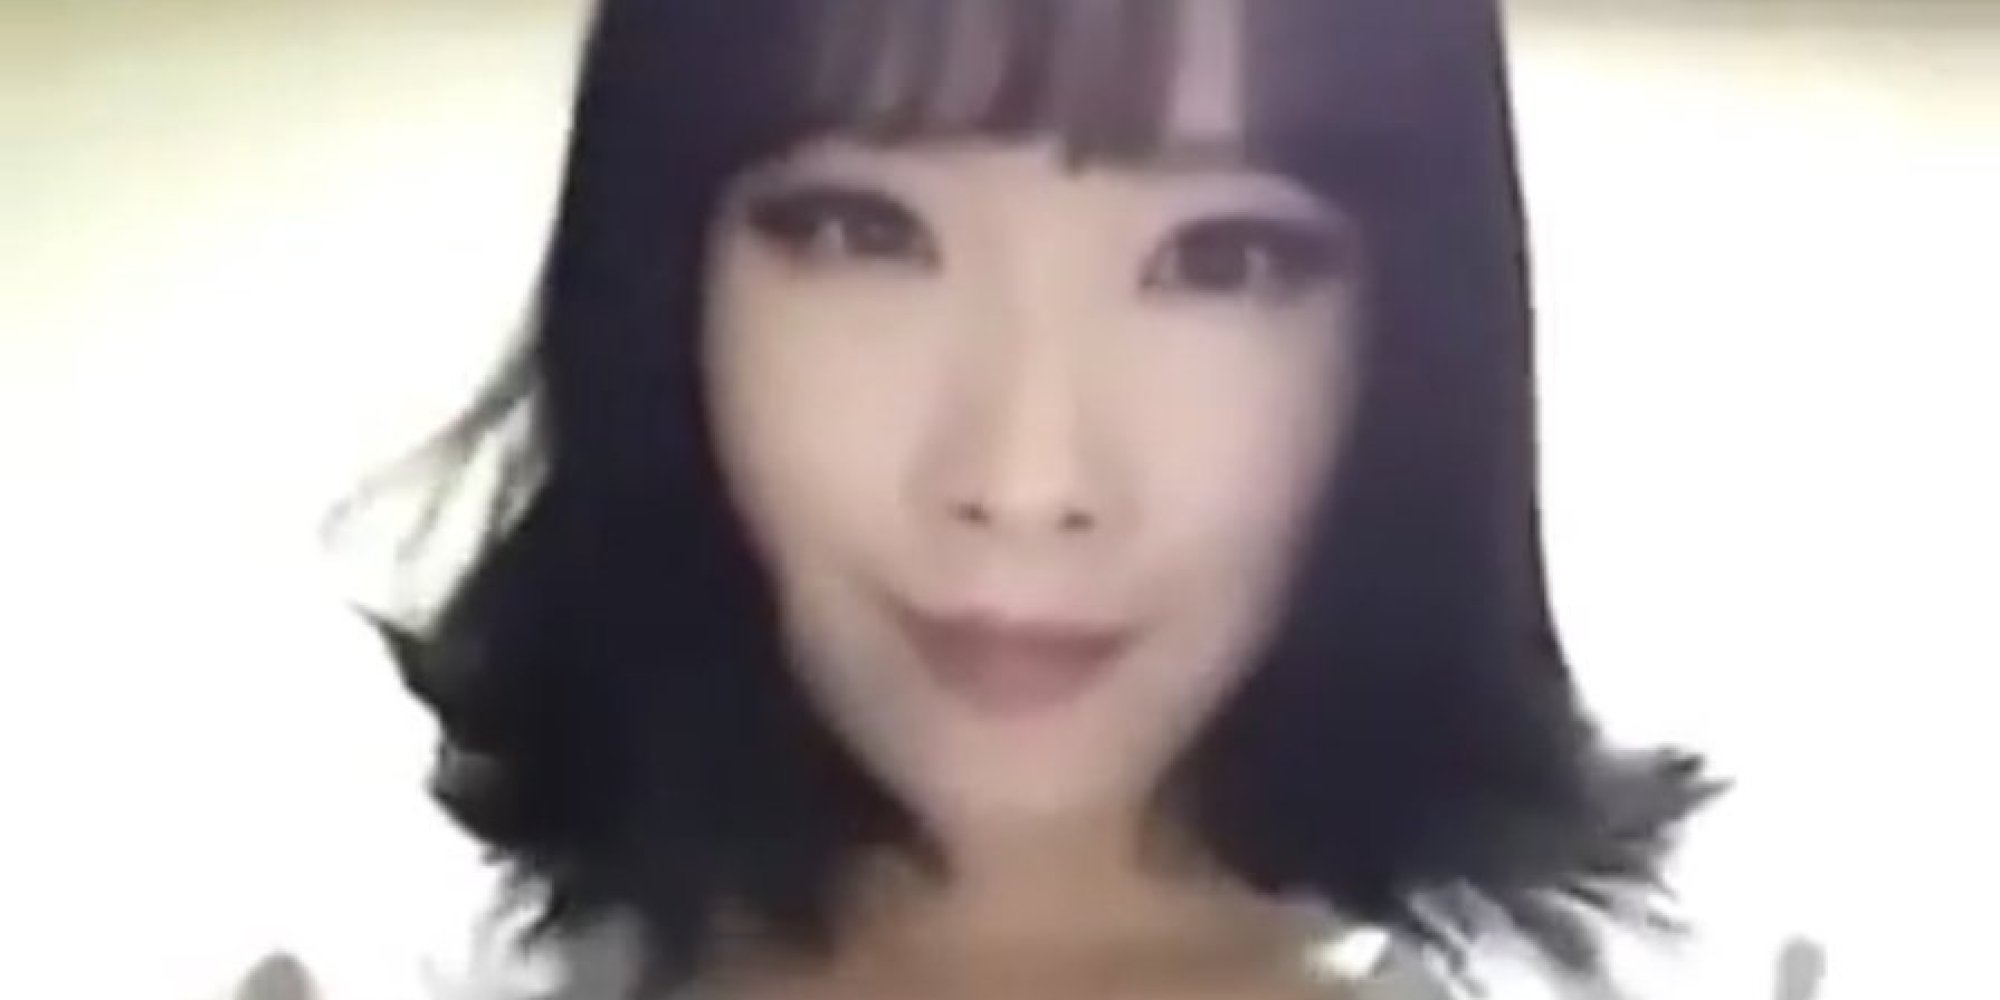 Viral Video Of South Korean Woman Removing Her Makeup Highlights The